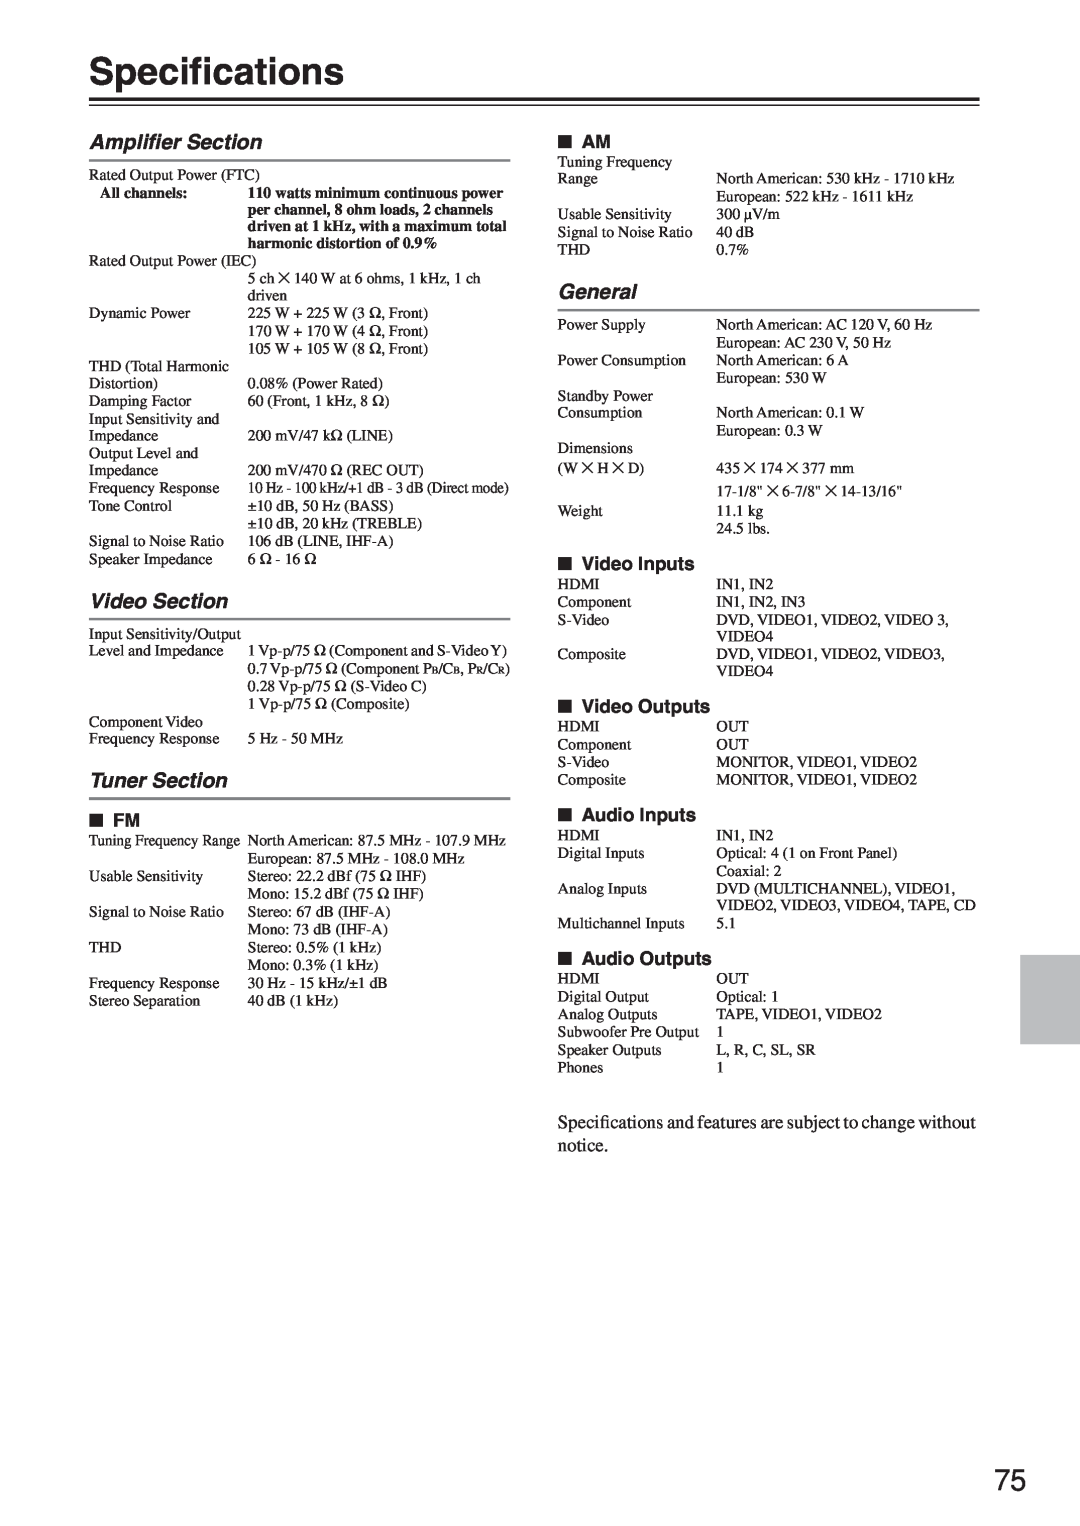 Onkyo HT-R640 instruction manual Speciﬁcations, Ampliﬁer Section, Video Section, Tuner Section, General, All channels 